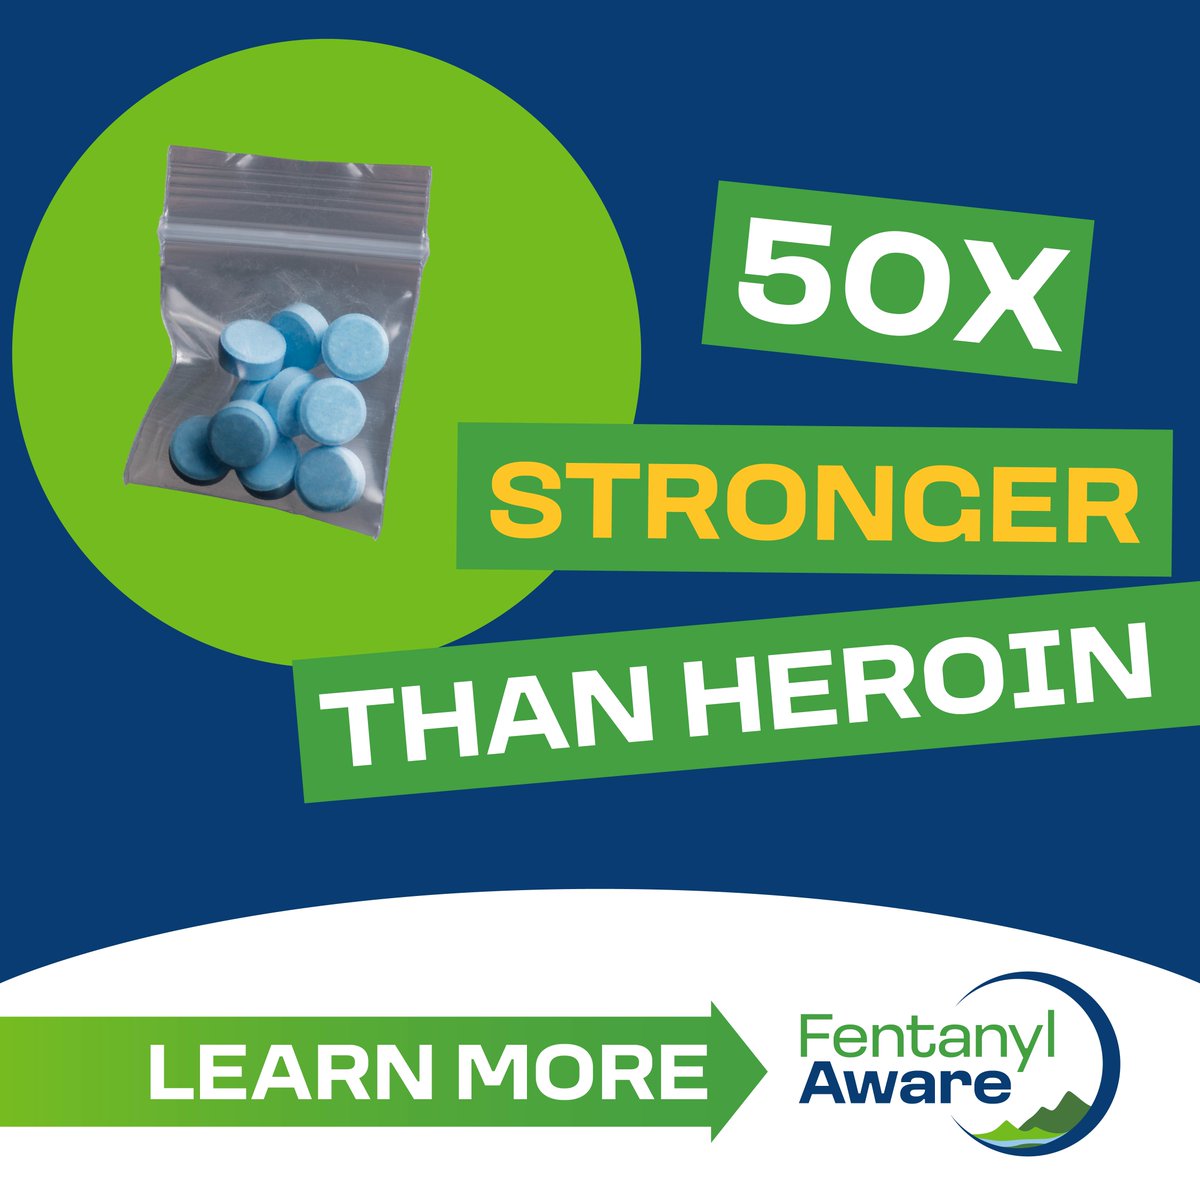 Fentanyl is a synthetic opioid that is tasteless, odorless, and extremely potent. To put it into perspective, a dose of fentanyl is up to 50 times stronger than heroin and up to 100 times stronger than morphine. Learn more at ow.ly/W4j450RzUyF